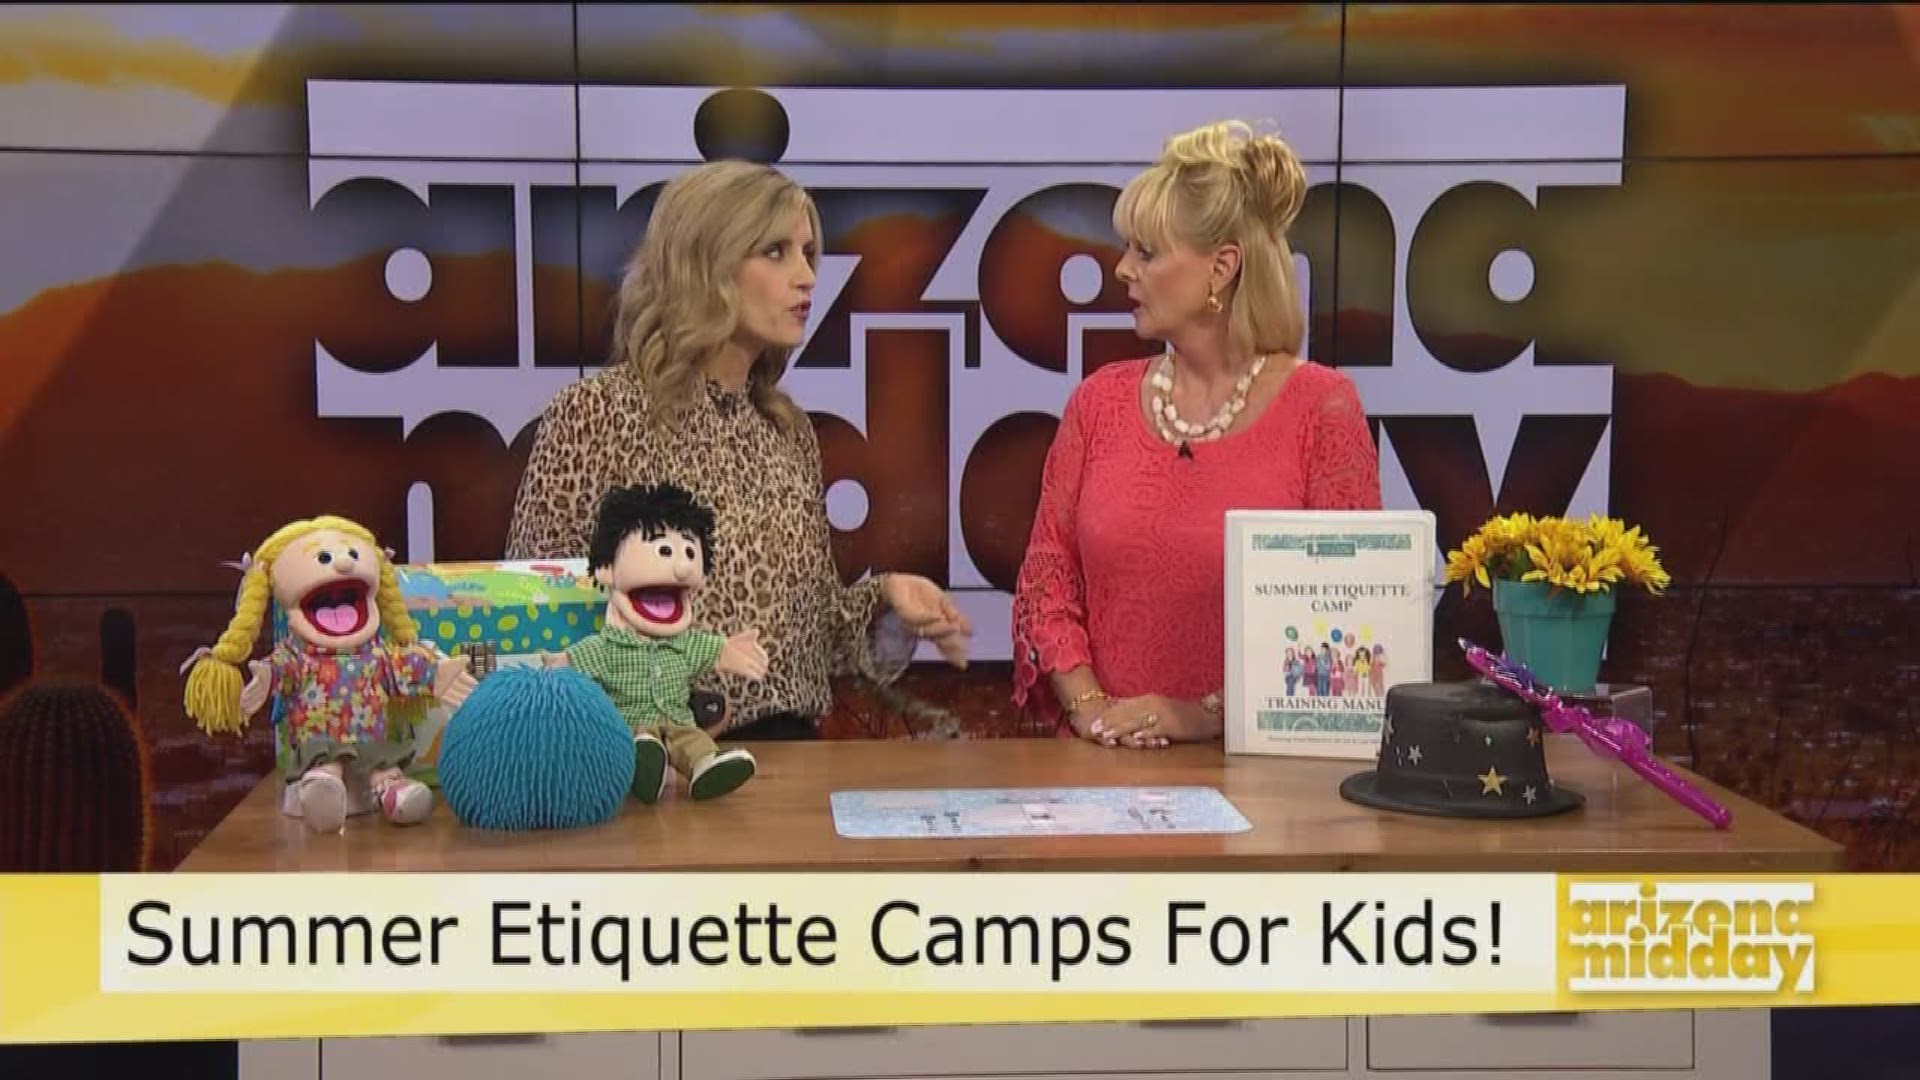 SueAnn Brown of It's All About Etiquette shows us some of the tricks up her sleeve for making etiquette camps and classes fun!